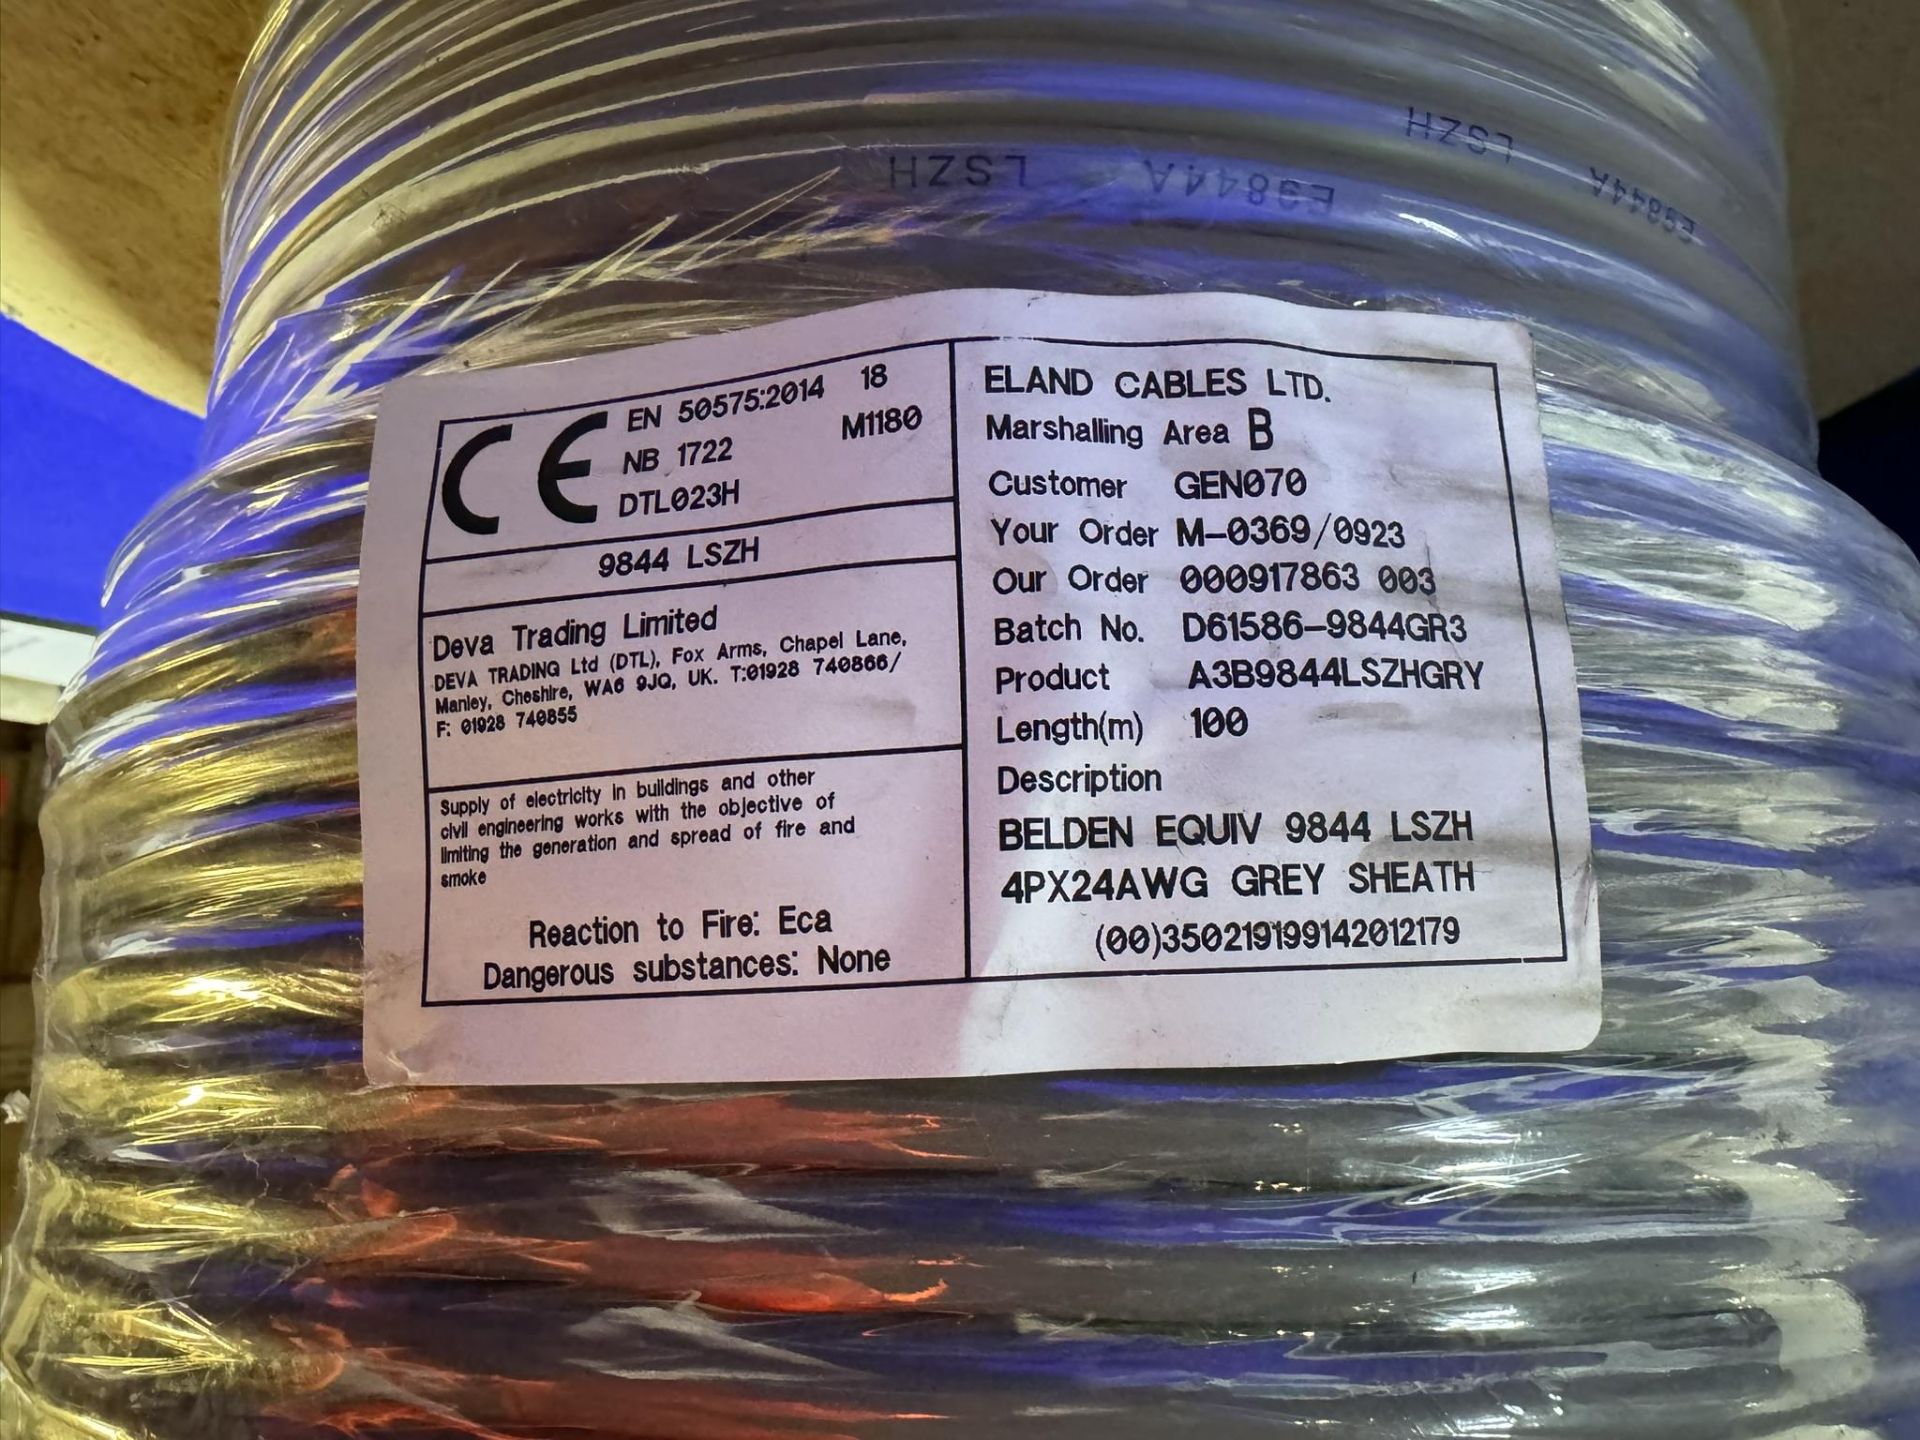 Reel Of Eland Cables Single Core Cable - Image 3 of 4